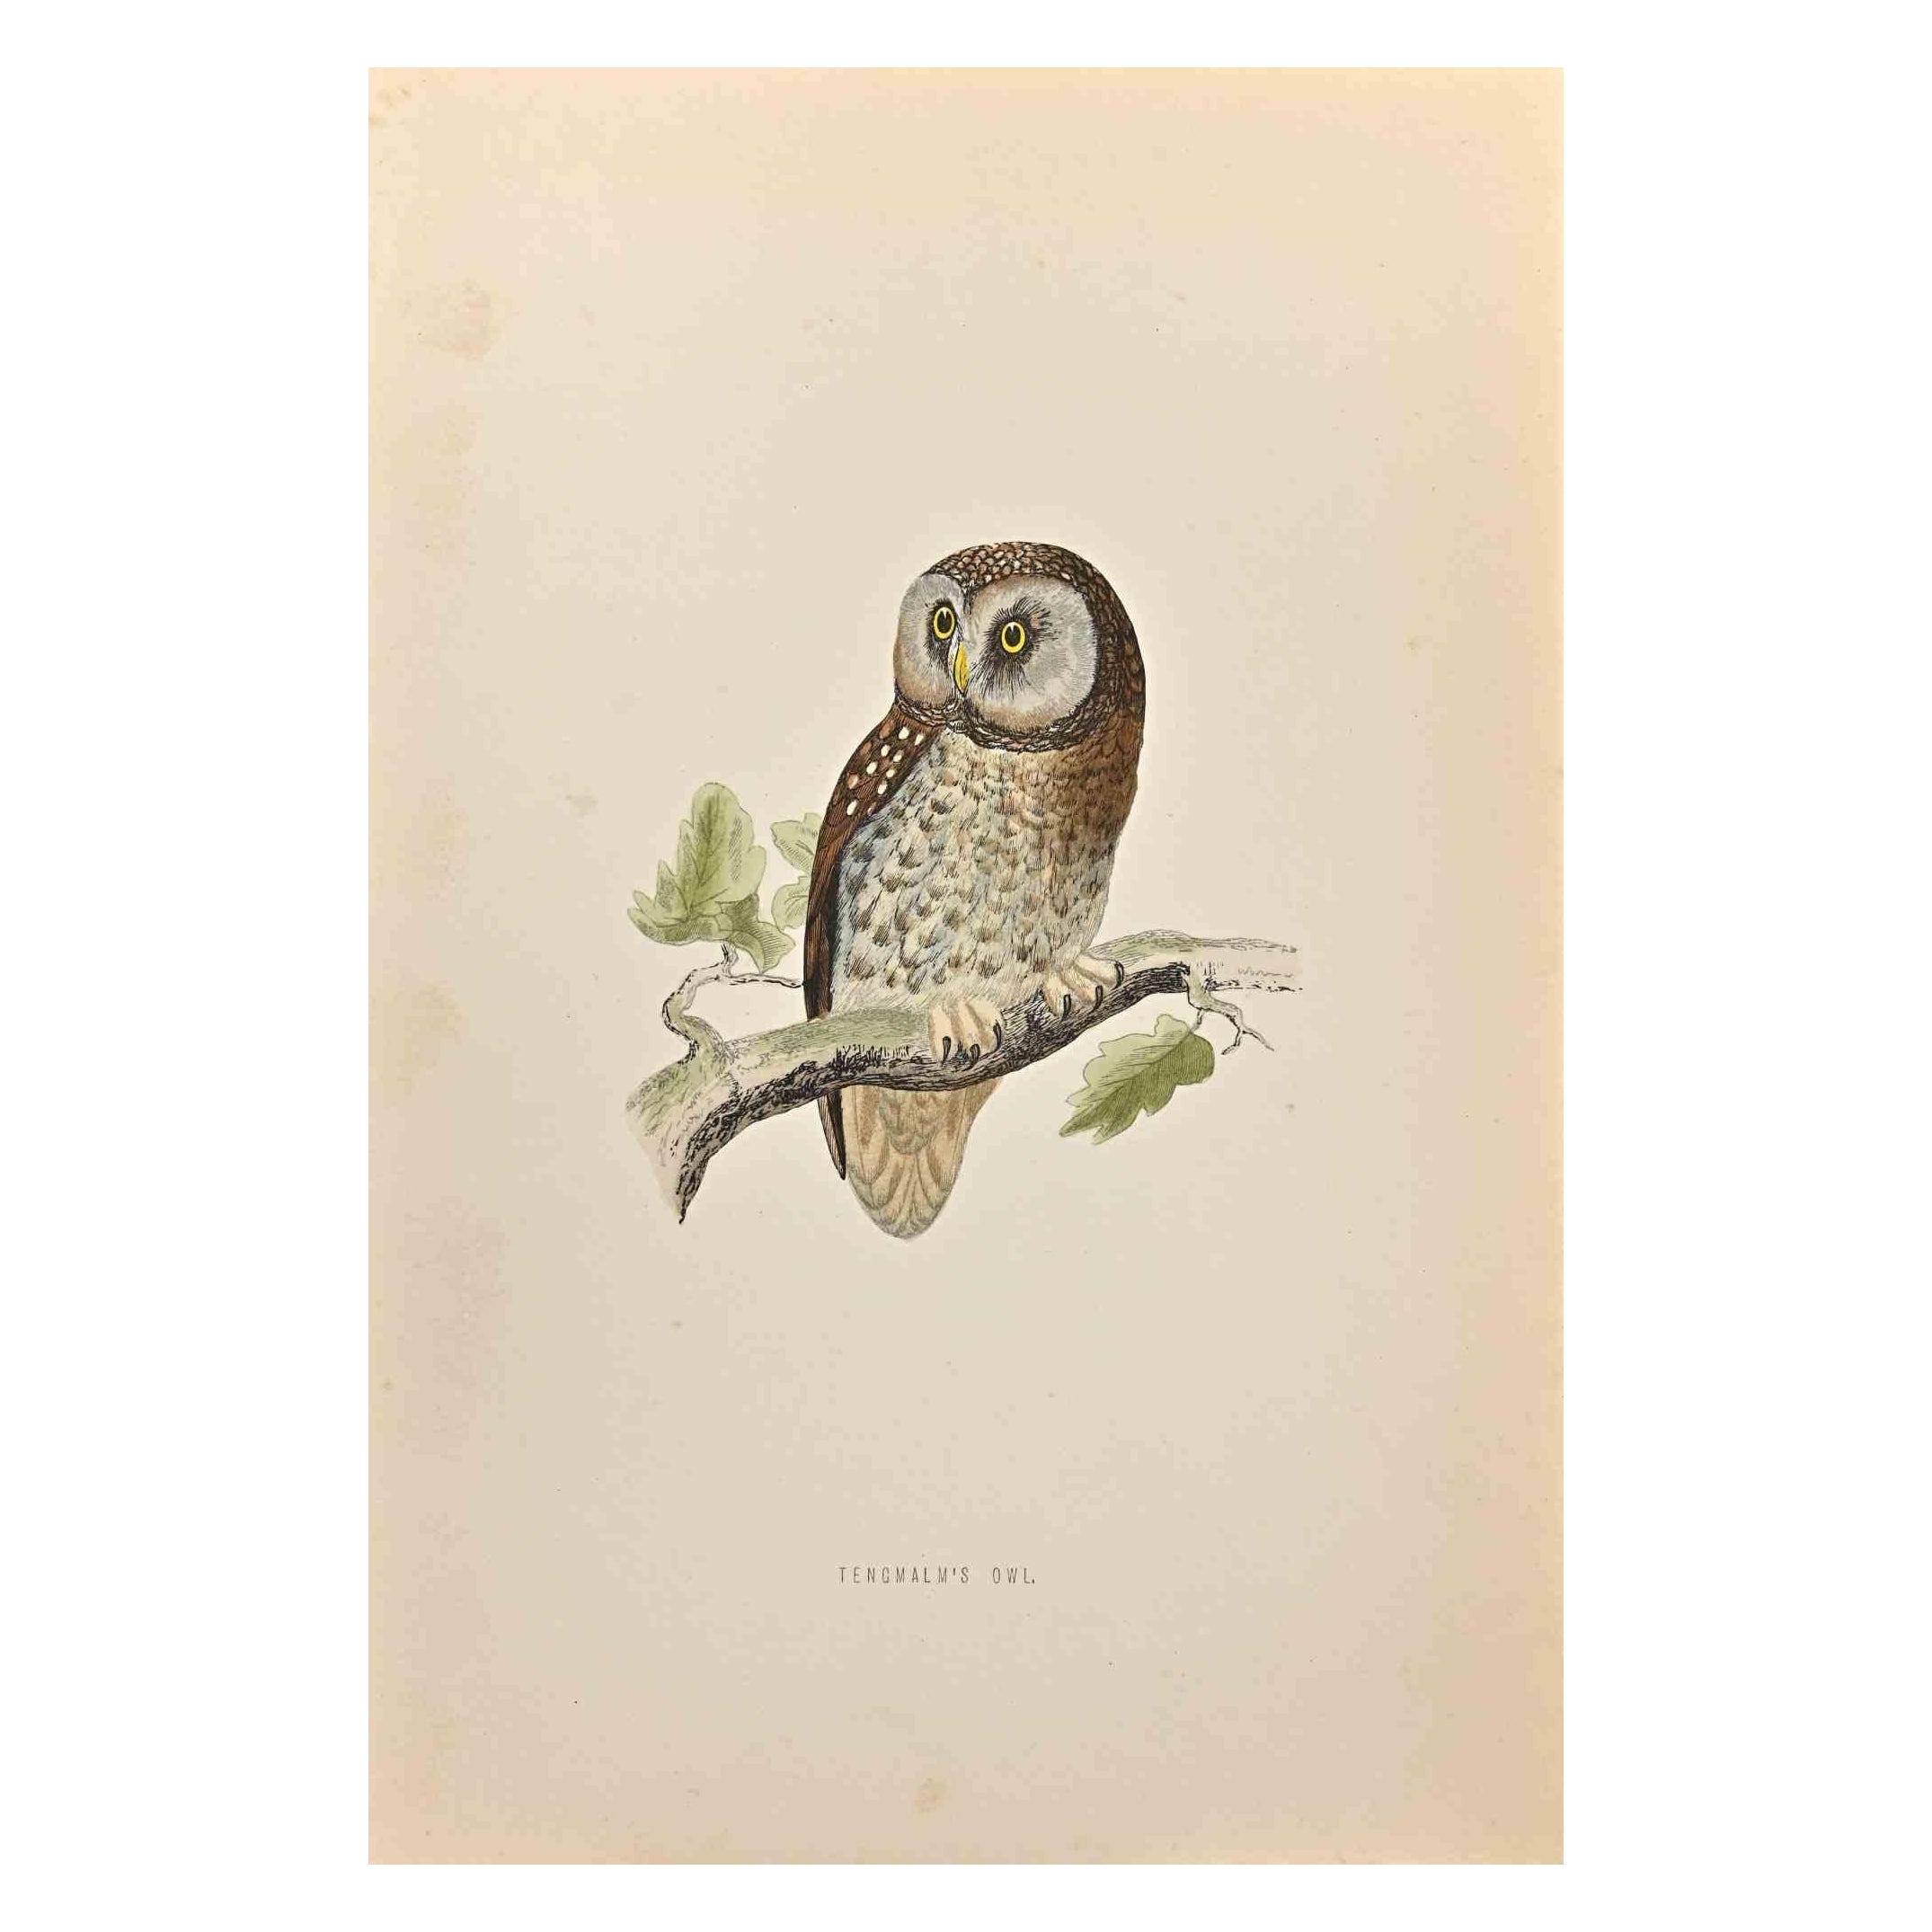 Tengmalm's Owl is a modern artwork realized in 1870 by the British artist Alexander Francis Lydon (1836-1917).

Woodcut print on ivory-colored paper.

Hand-colored, published by London, Bell & Sons, 1870.  

The name of the bird is printed on the